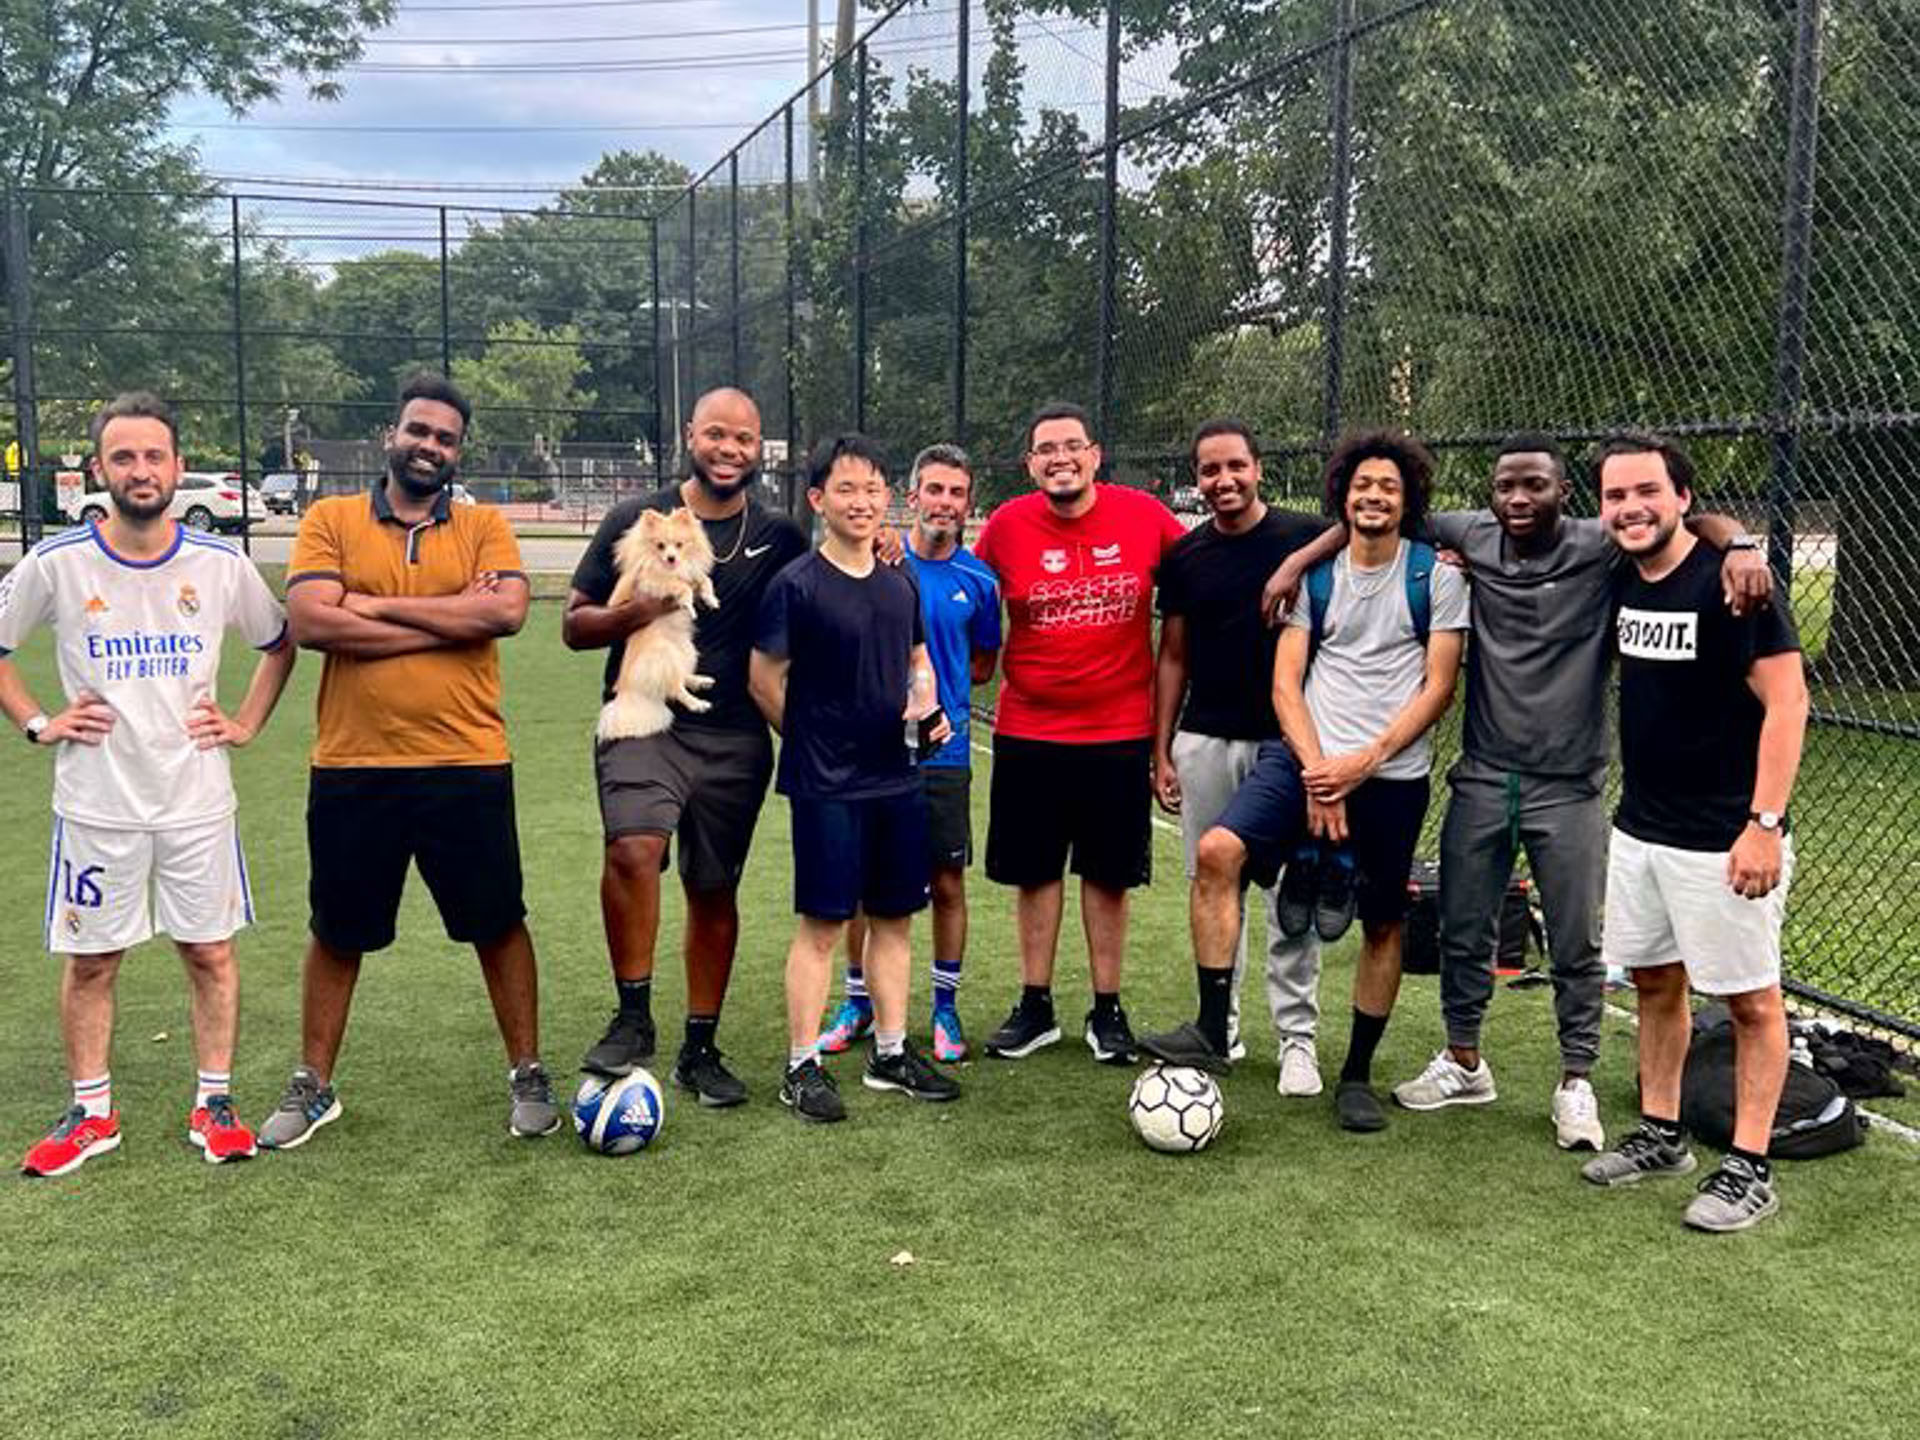 Englewood FC! Our podiatry residents also join in on the fun.